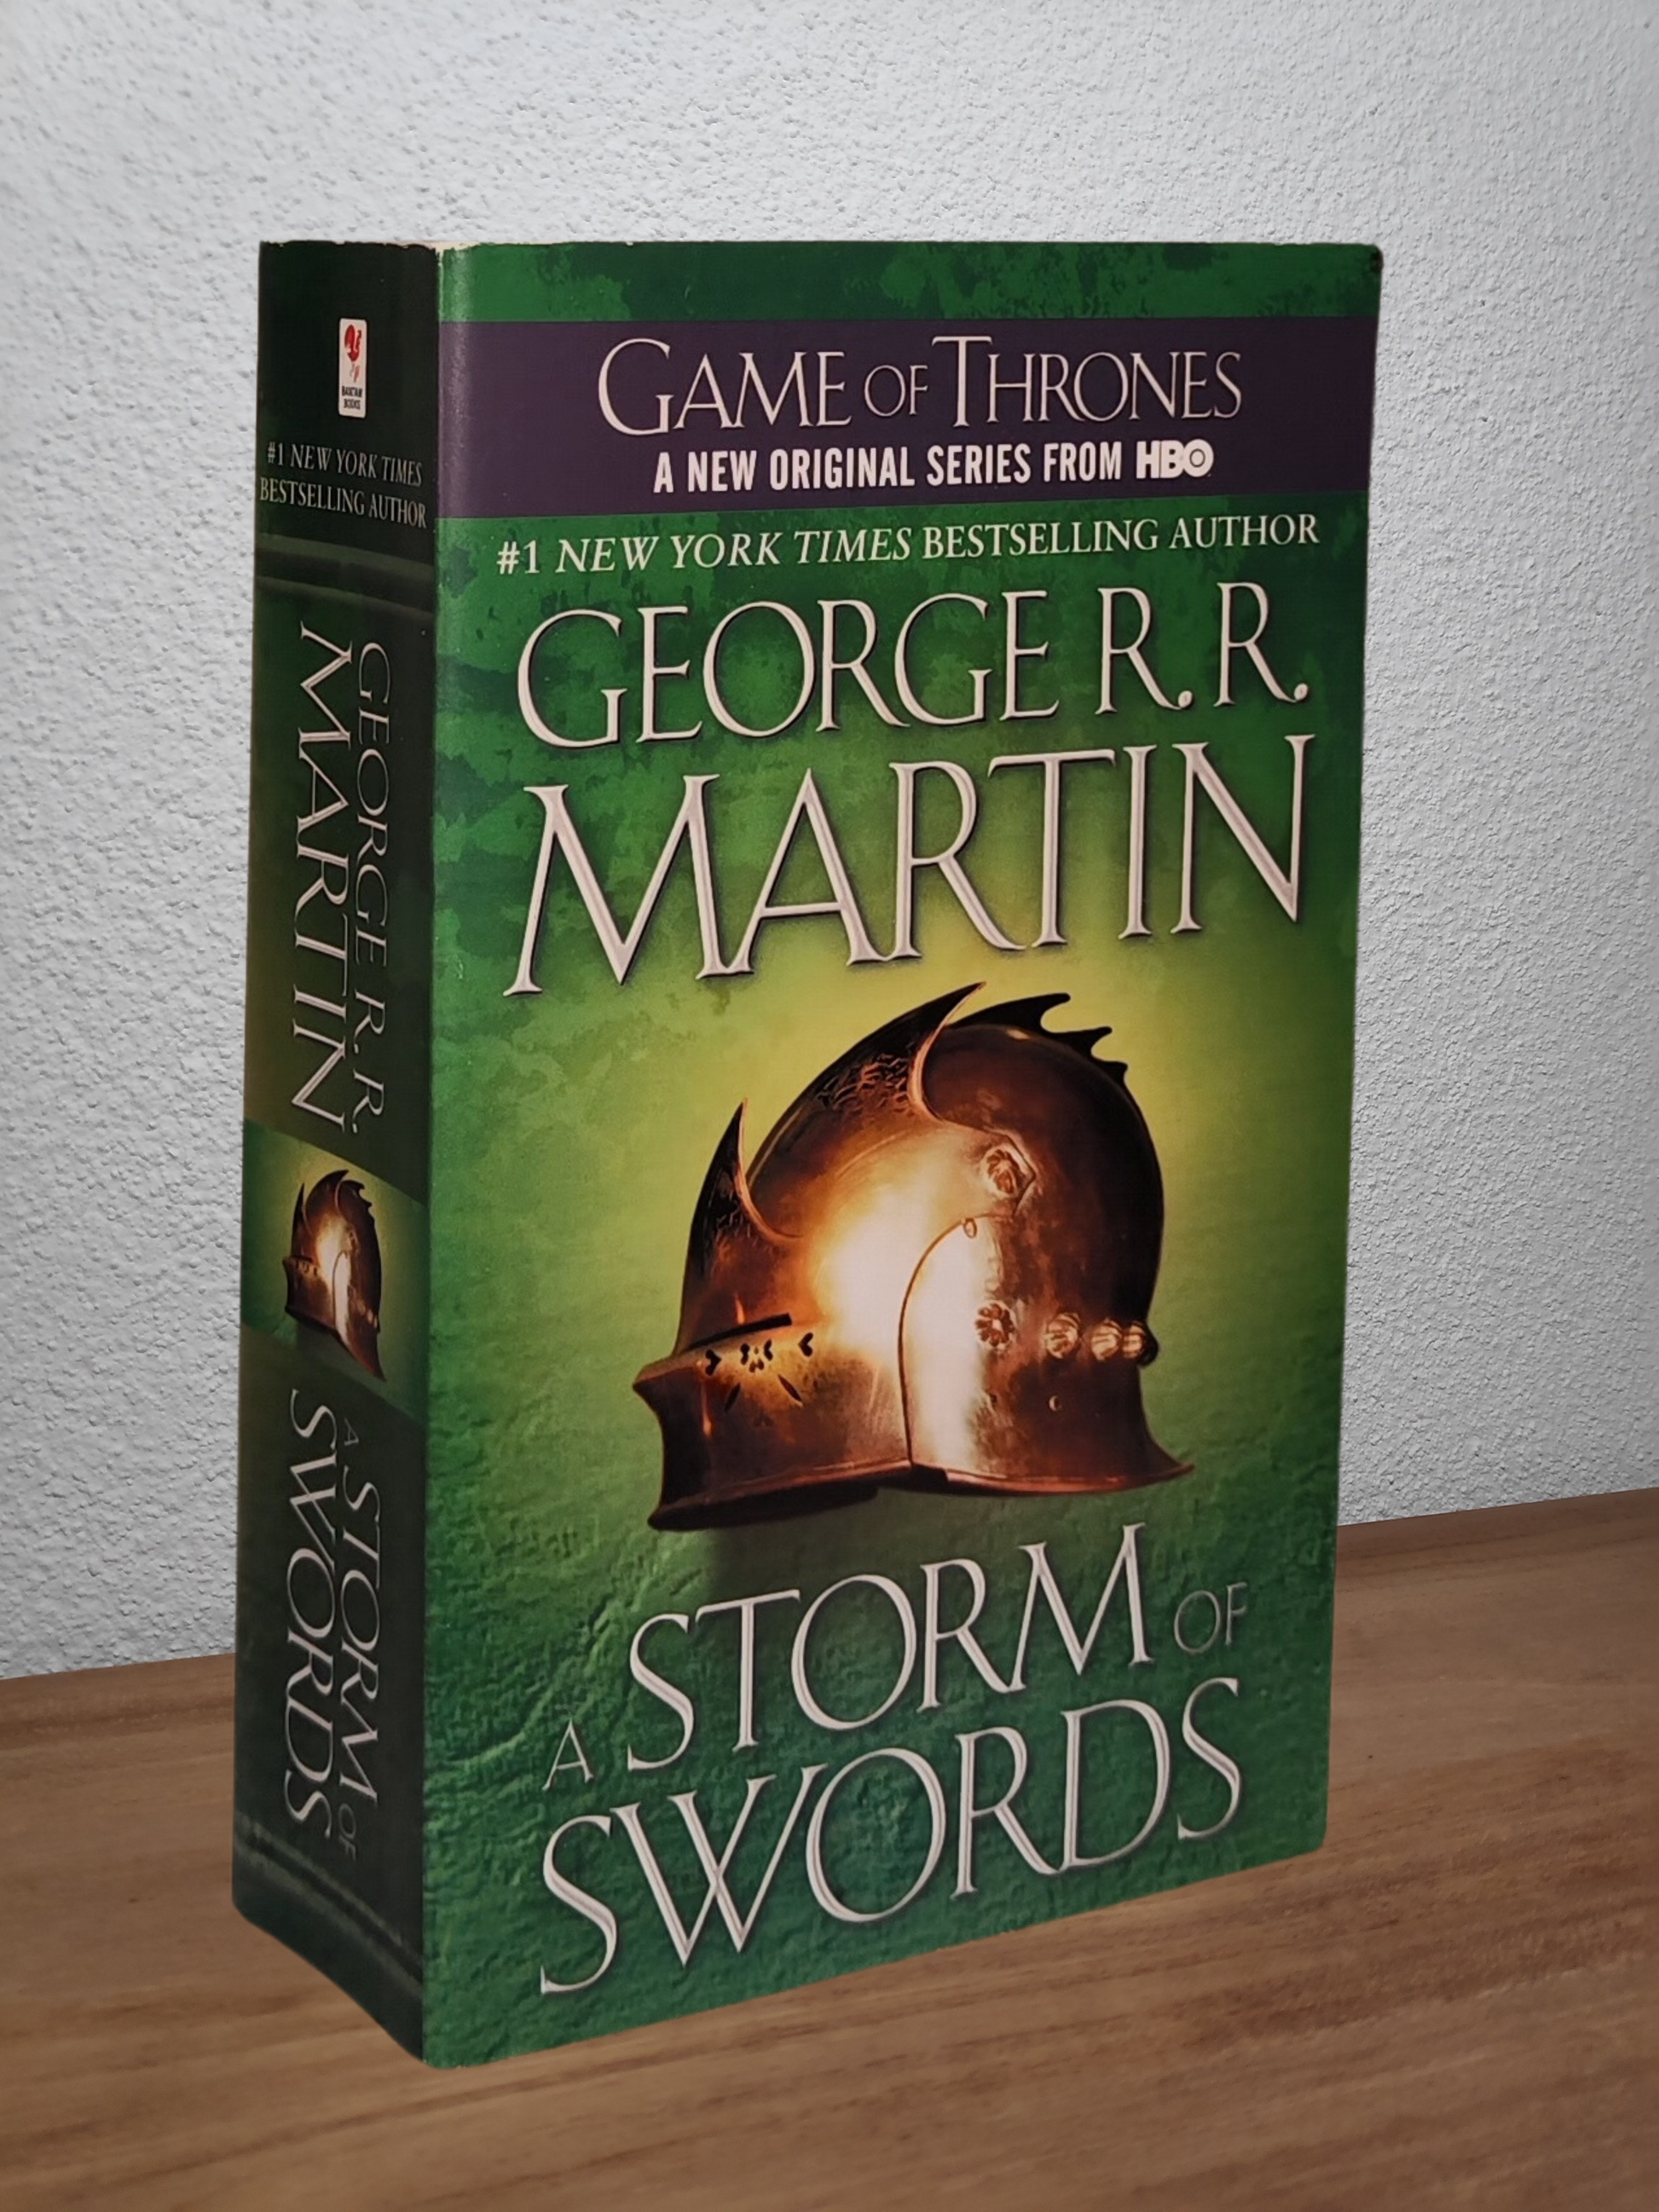 George R. R. Martin - A Storm of Swords (A Song of Ice and Fire #3) - Second-hand english book to deliver in Zurich & Switzerland